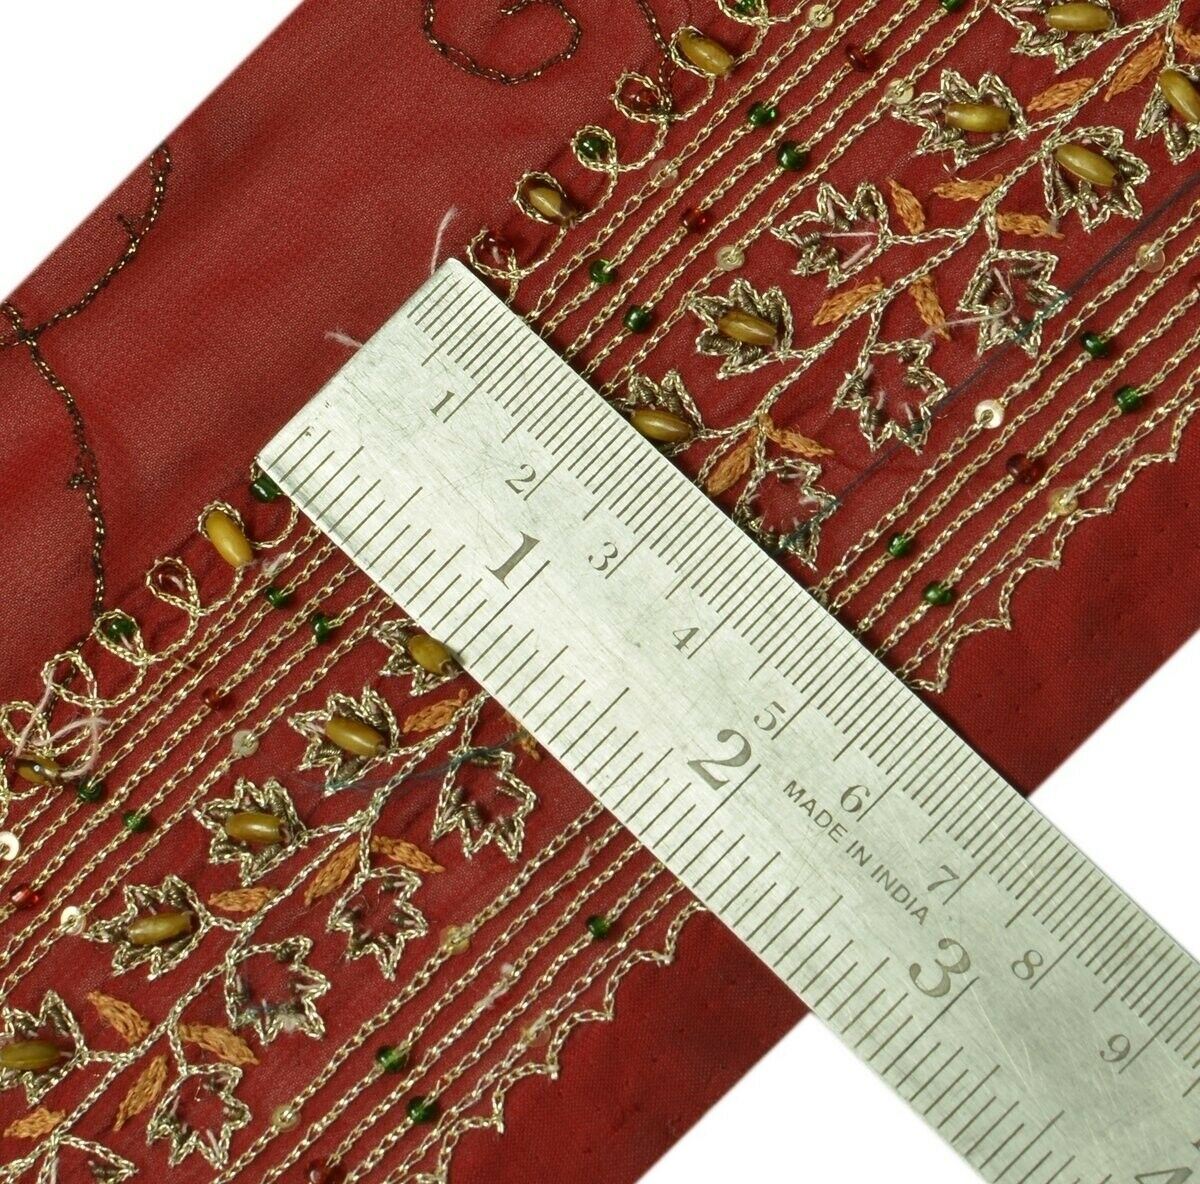 Vintage Sari Border Indian Craft Trim Hand Beaded Embroidered Ribbon Lace Maroon